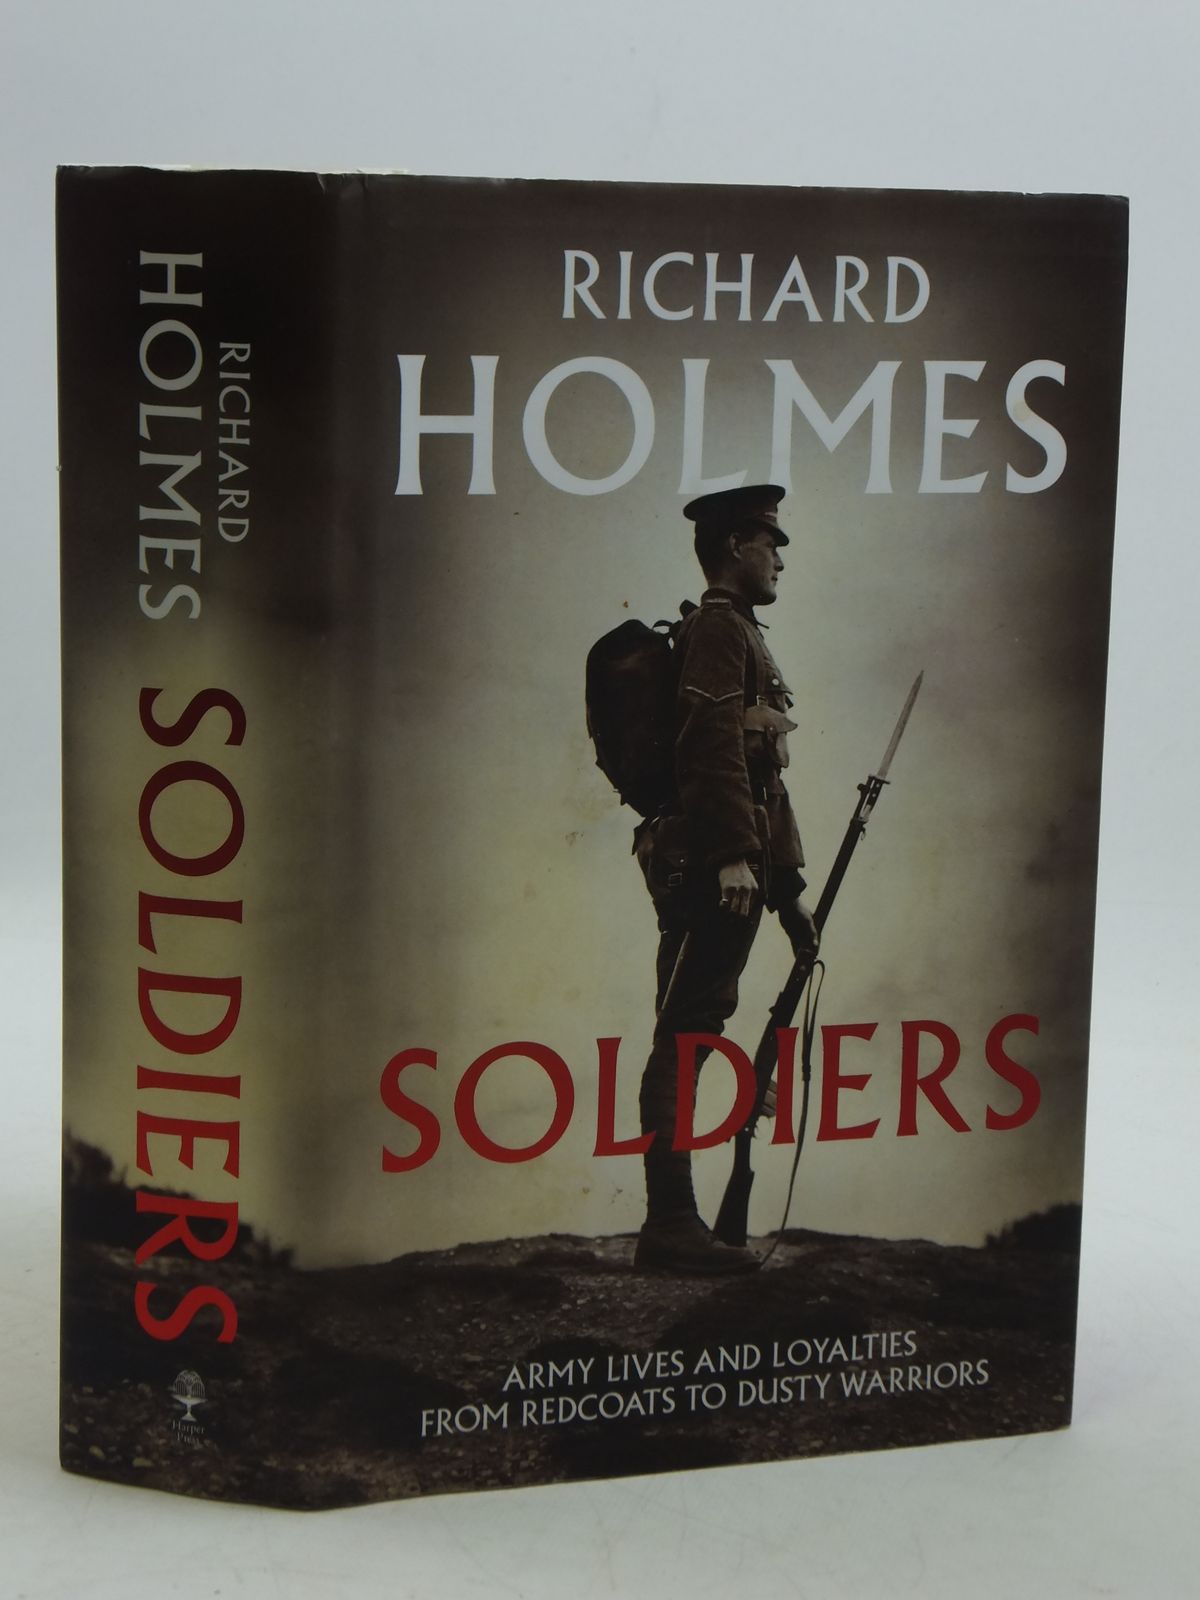 Photo of SOLDIERS ARMY LIVES AND LOYALTIES FROM REDCOATS TO DUSTY WARRIORS written by Holmes, Richard published by Harper Press (STOCK CODE: 2110724)  for sale by Stella & Rose's Books